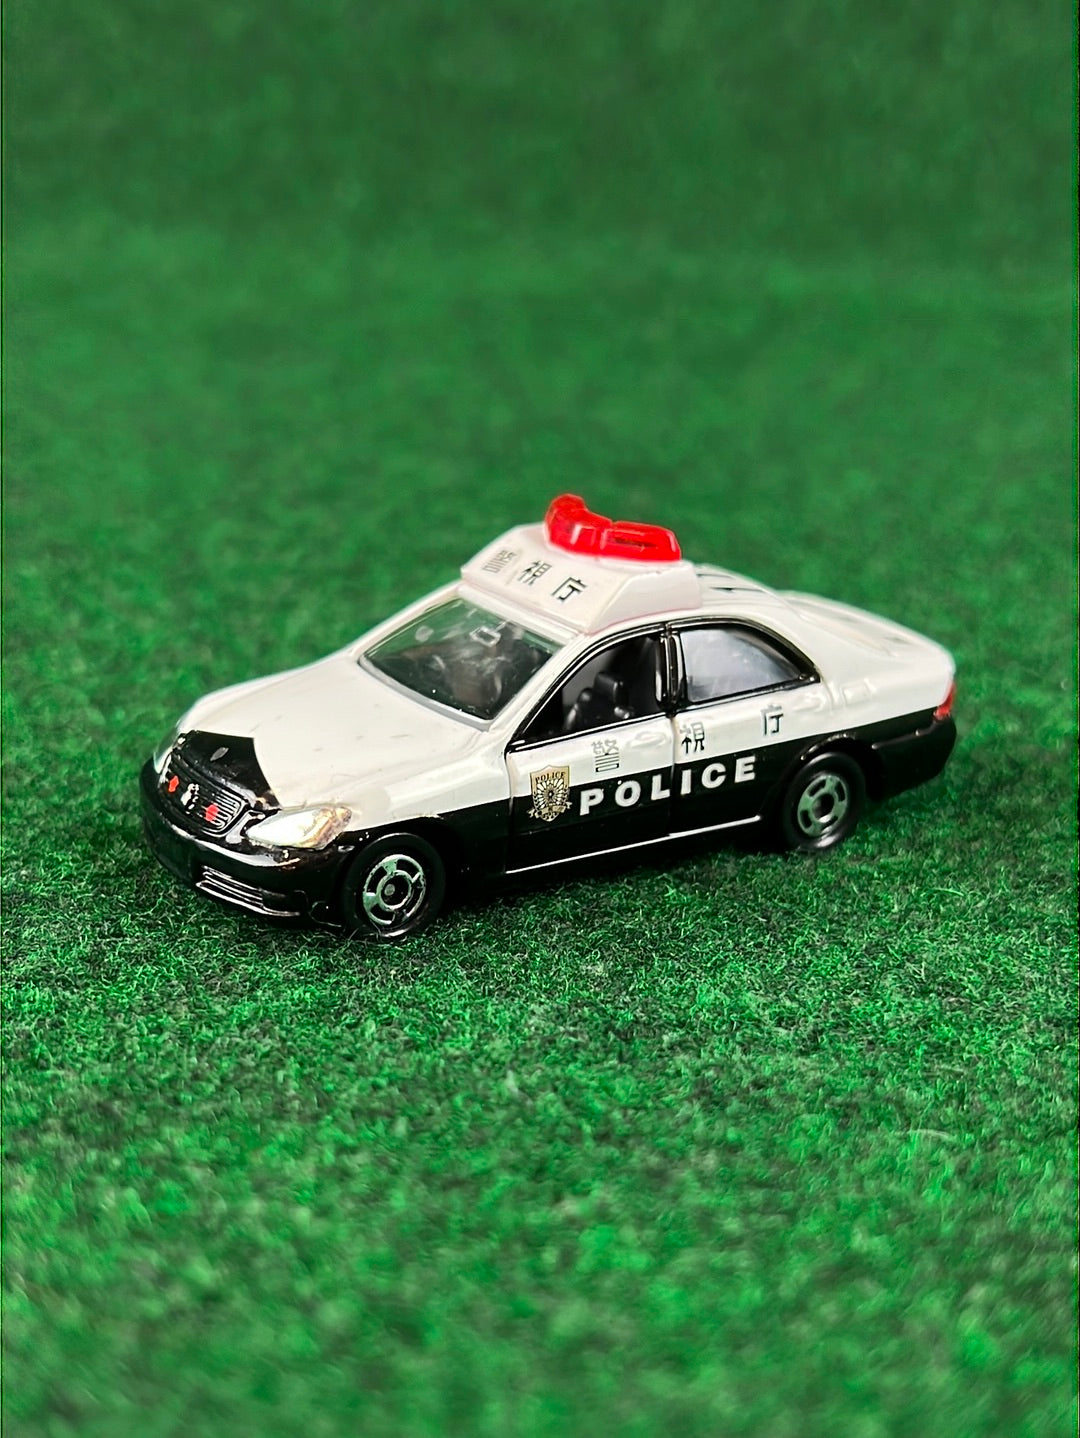 TOMICA Cargo Delivery Van and Toyota Crown Japanese Police Toy Car Set